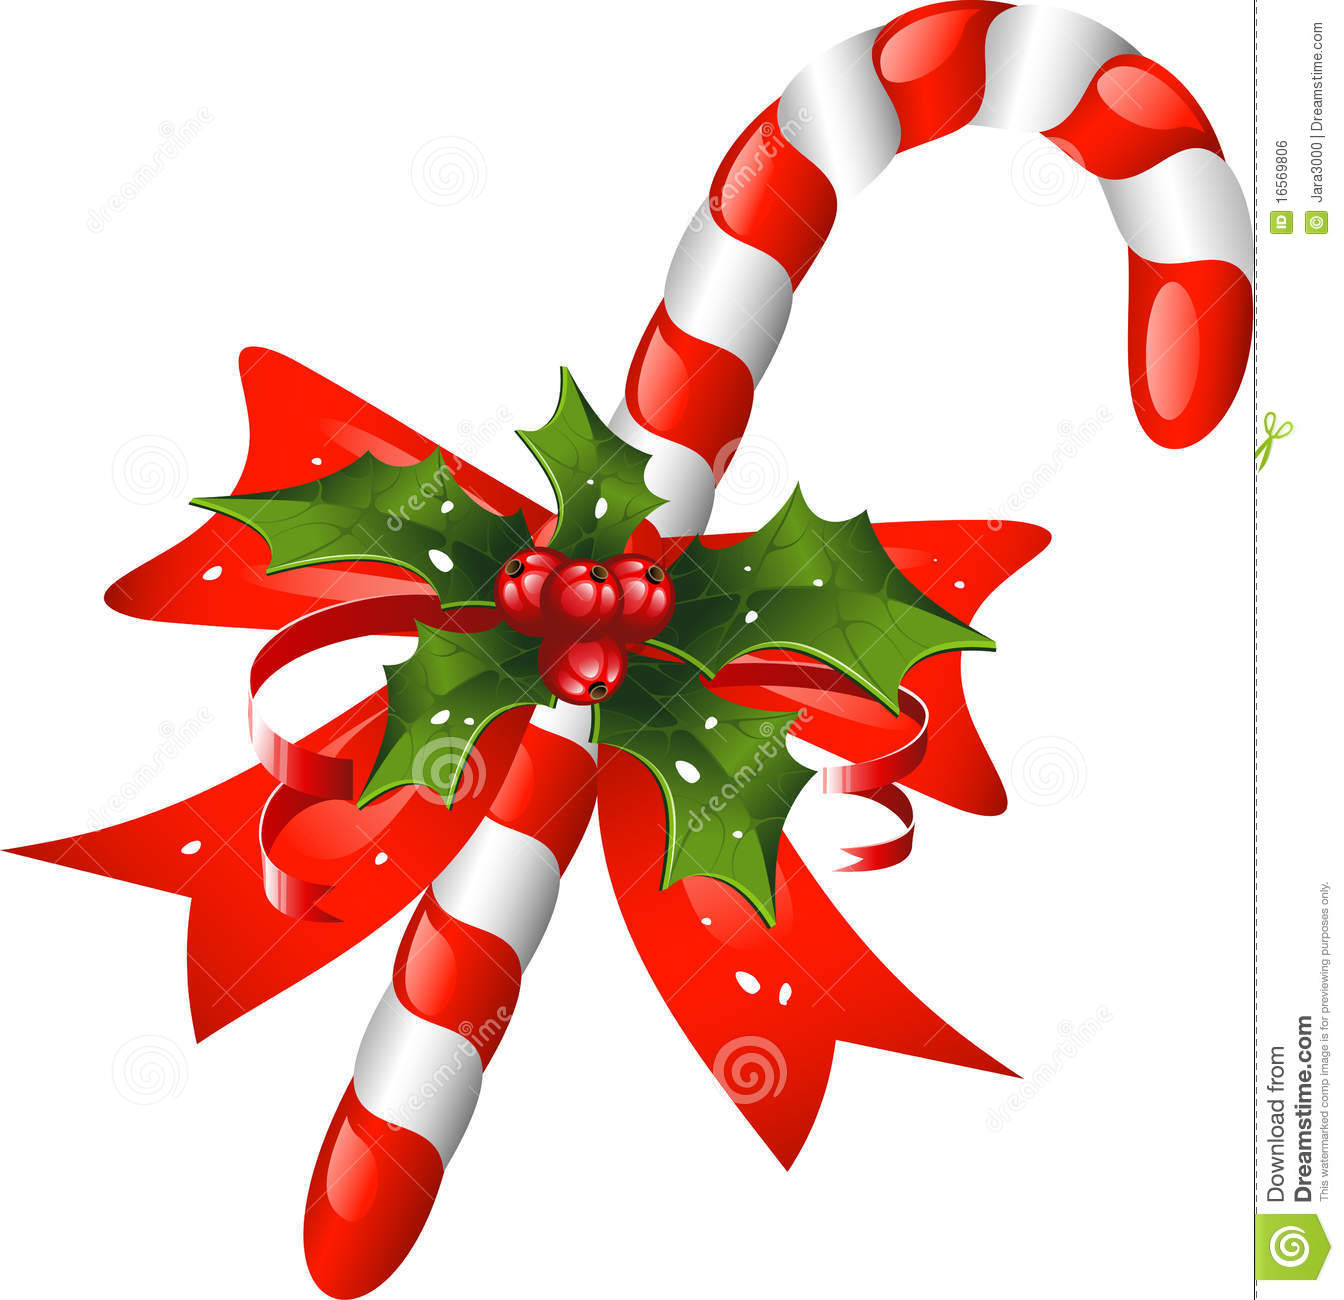 Christmas Candy Pictures
 Christmas Candy Cane Decorated With A Bow And Holl Stock